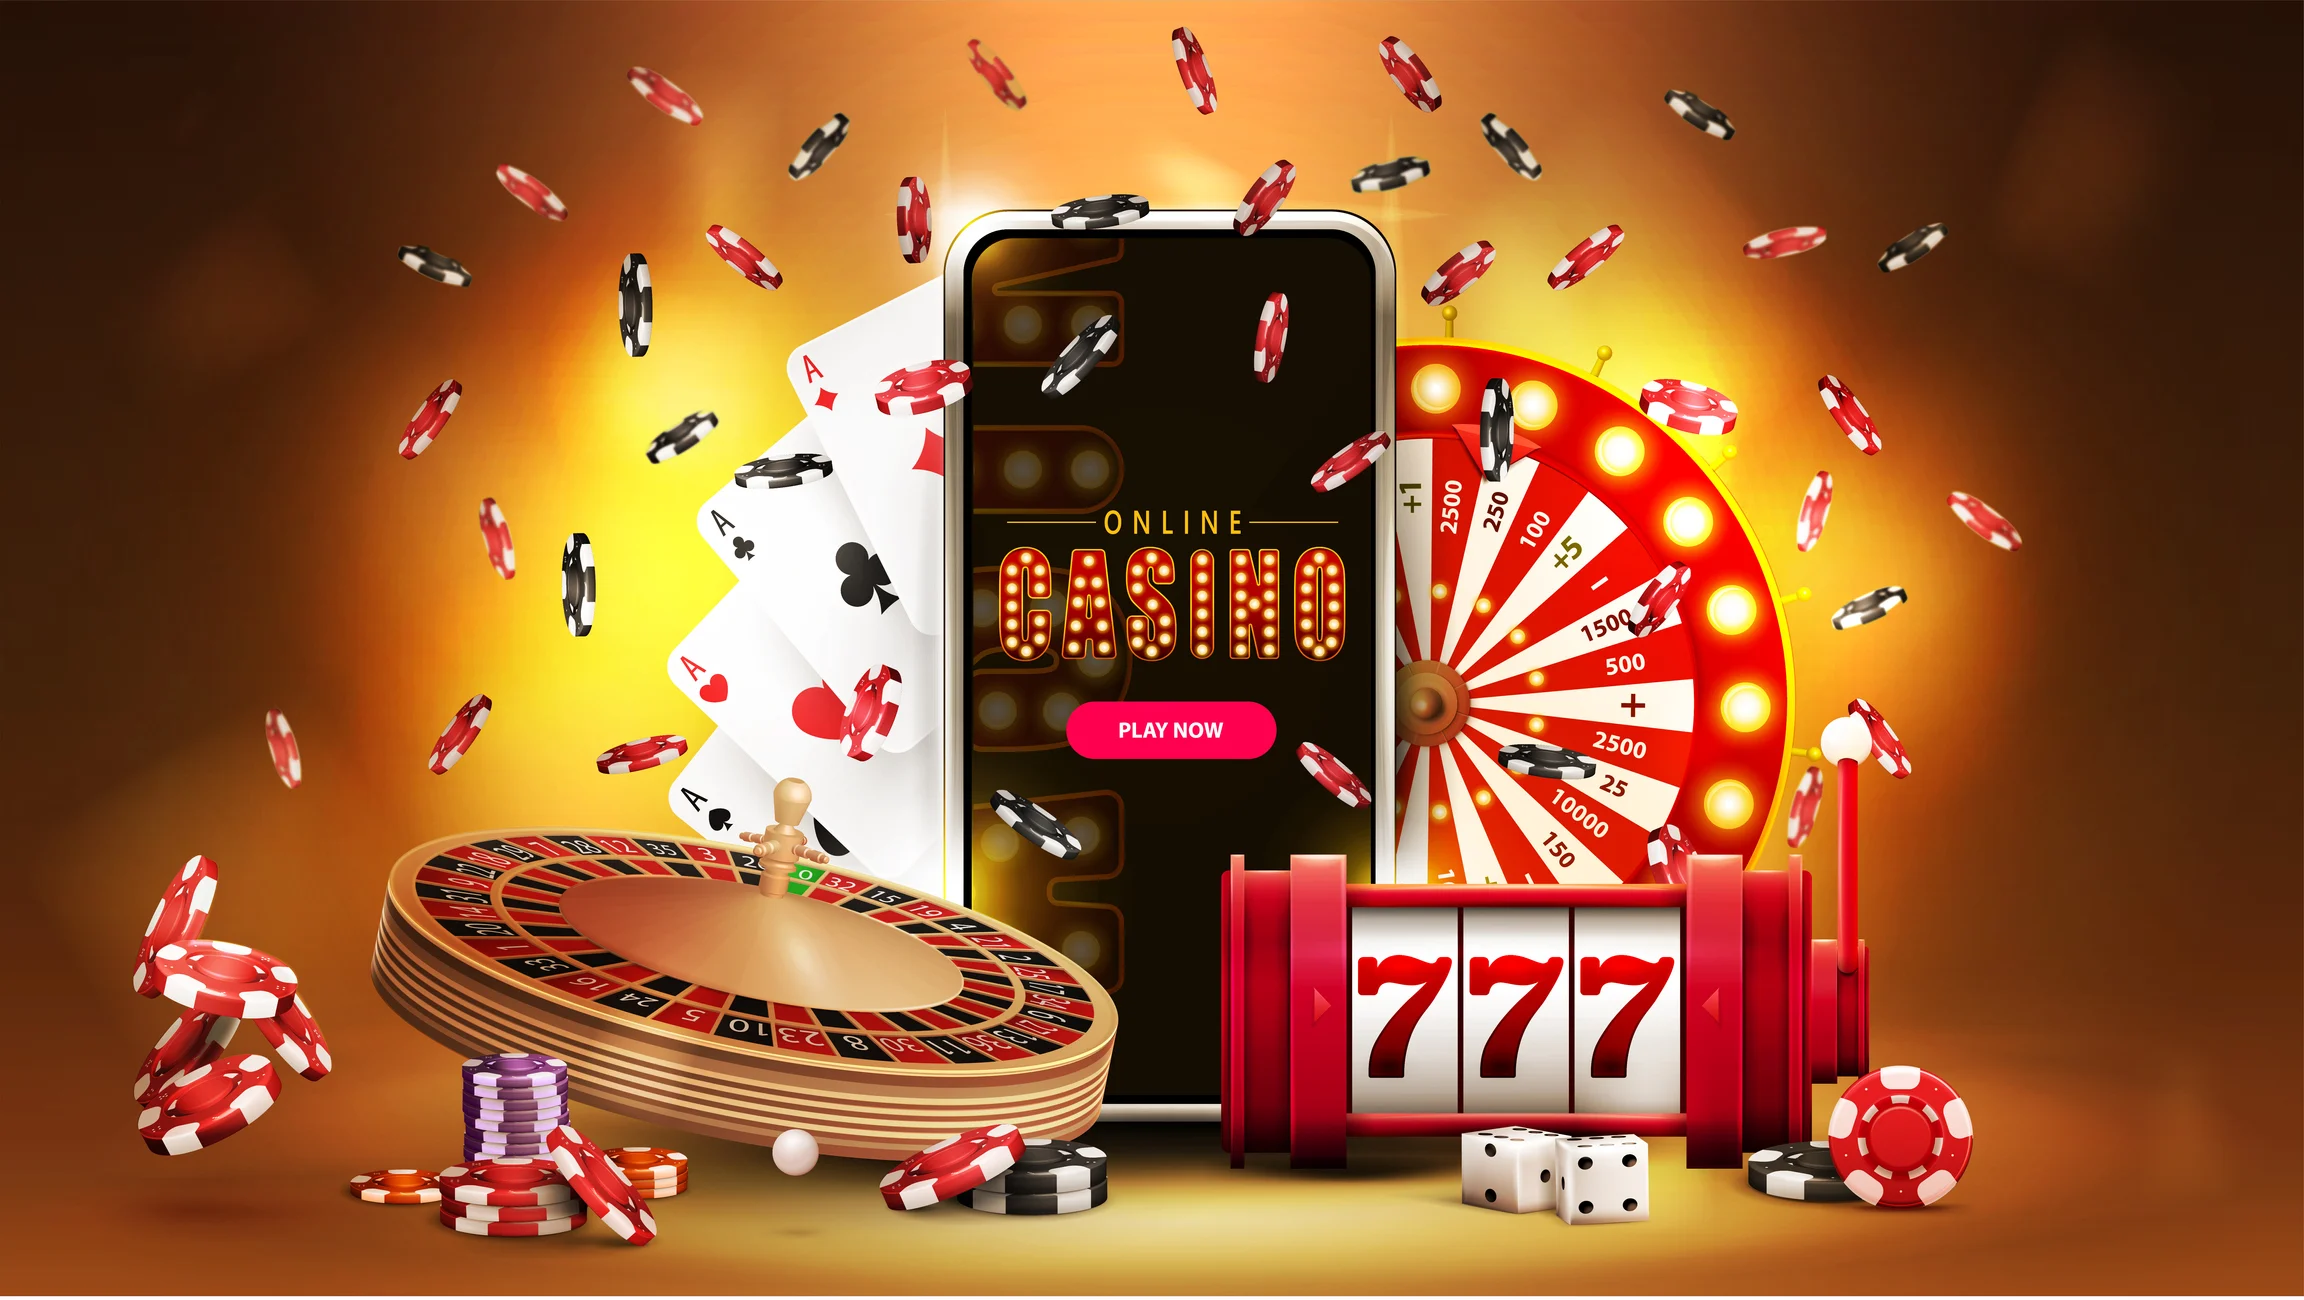 Internet-based casinos in India offer unparalleled advantages compared to their traditional counterparts. 2.0 - The Next Step